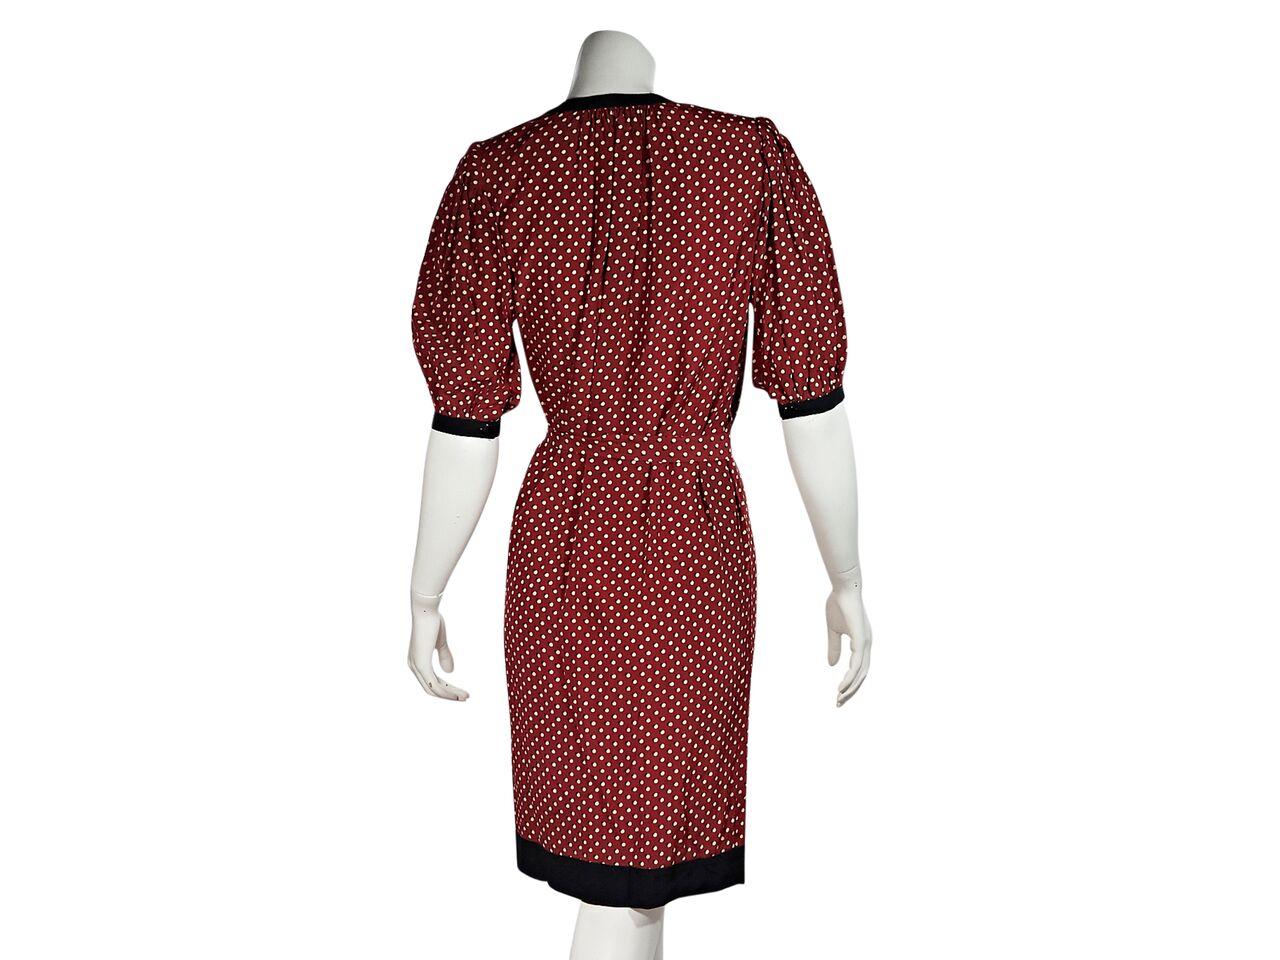 Product details:  Vintage red polka-dot printed tea dress by Emanuel Ungaro.  Circa the 1970s/1980s.  Crewneck.  Elbow-length sleeves.  Quarter button-front placket.  Self-tie belted waist.  43